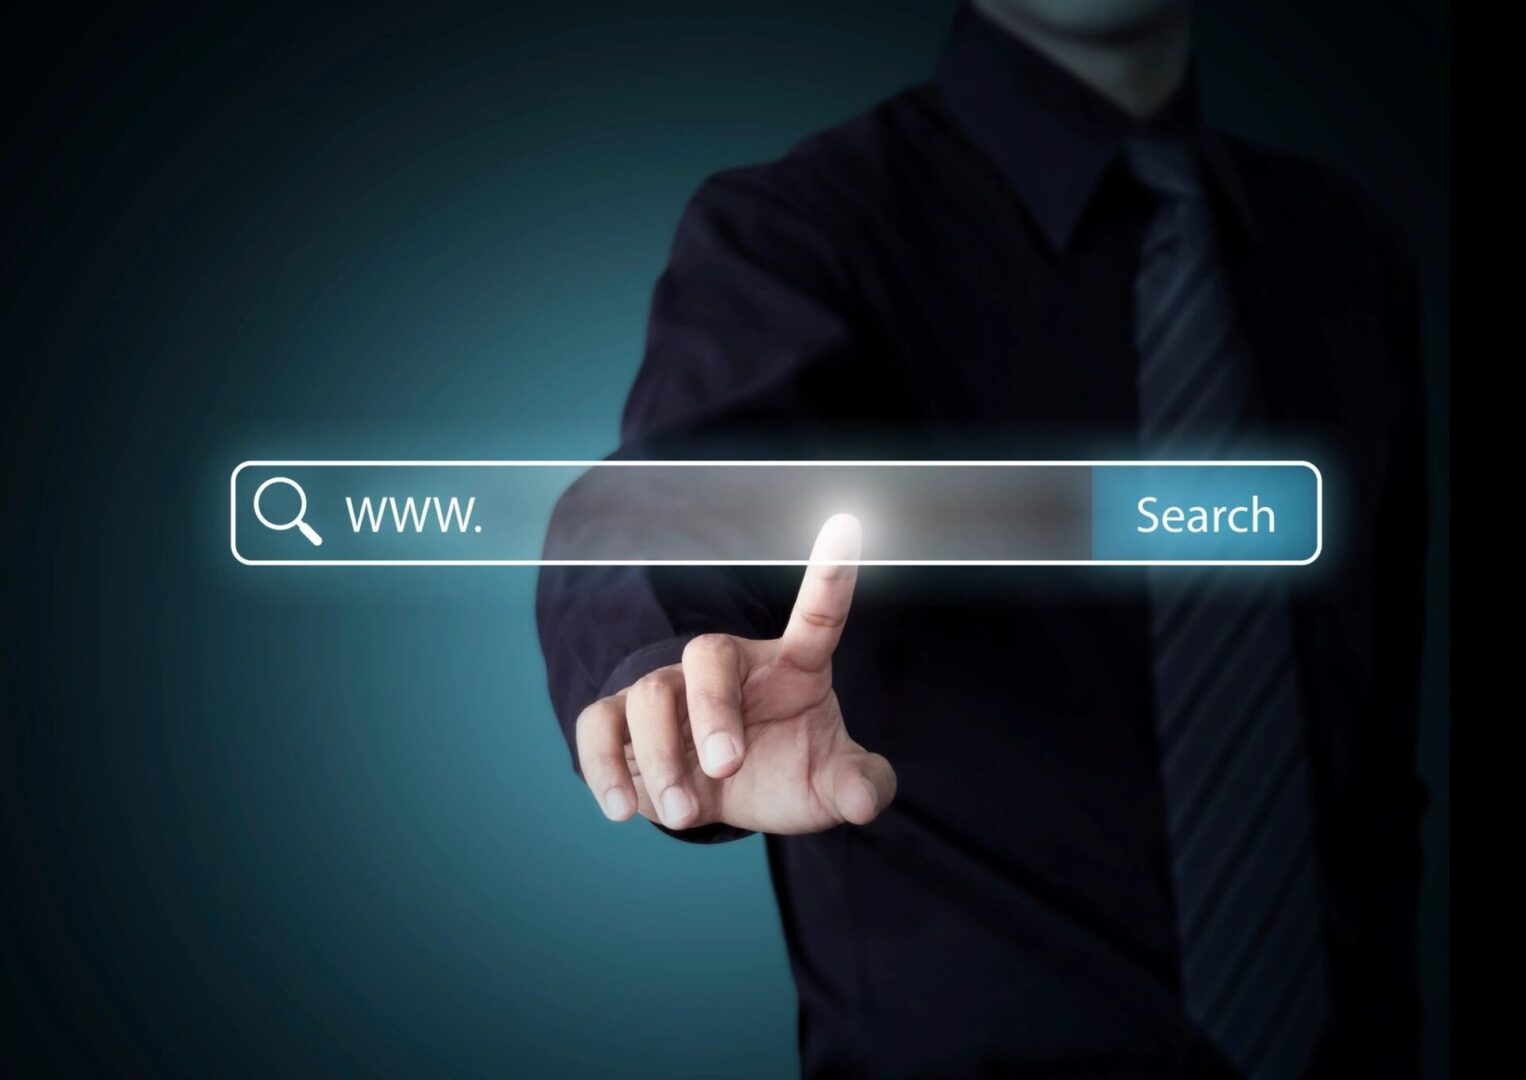 A man in black shirt and tie pointing to the search bar.